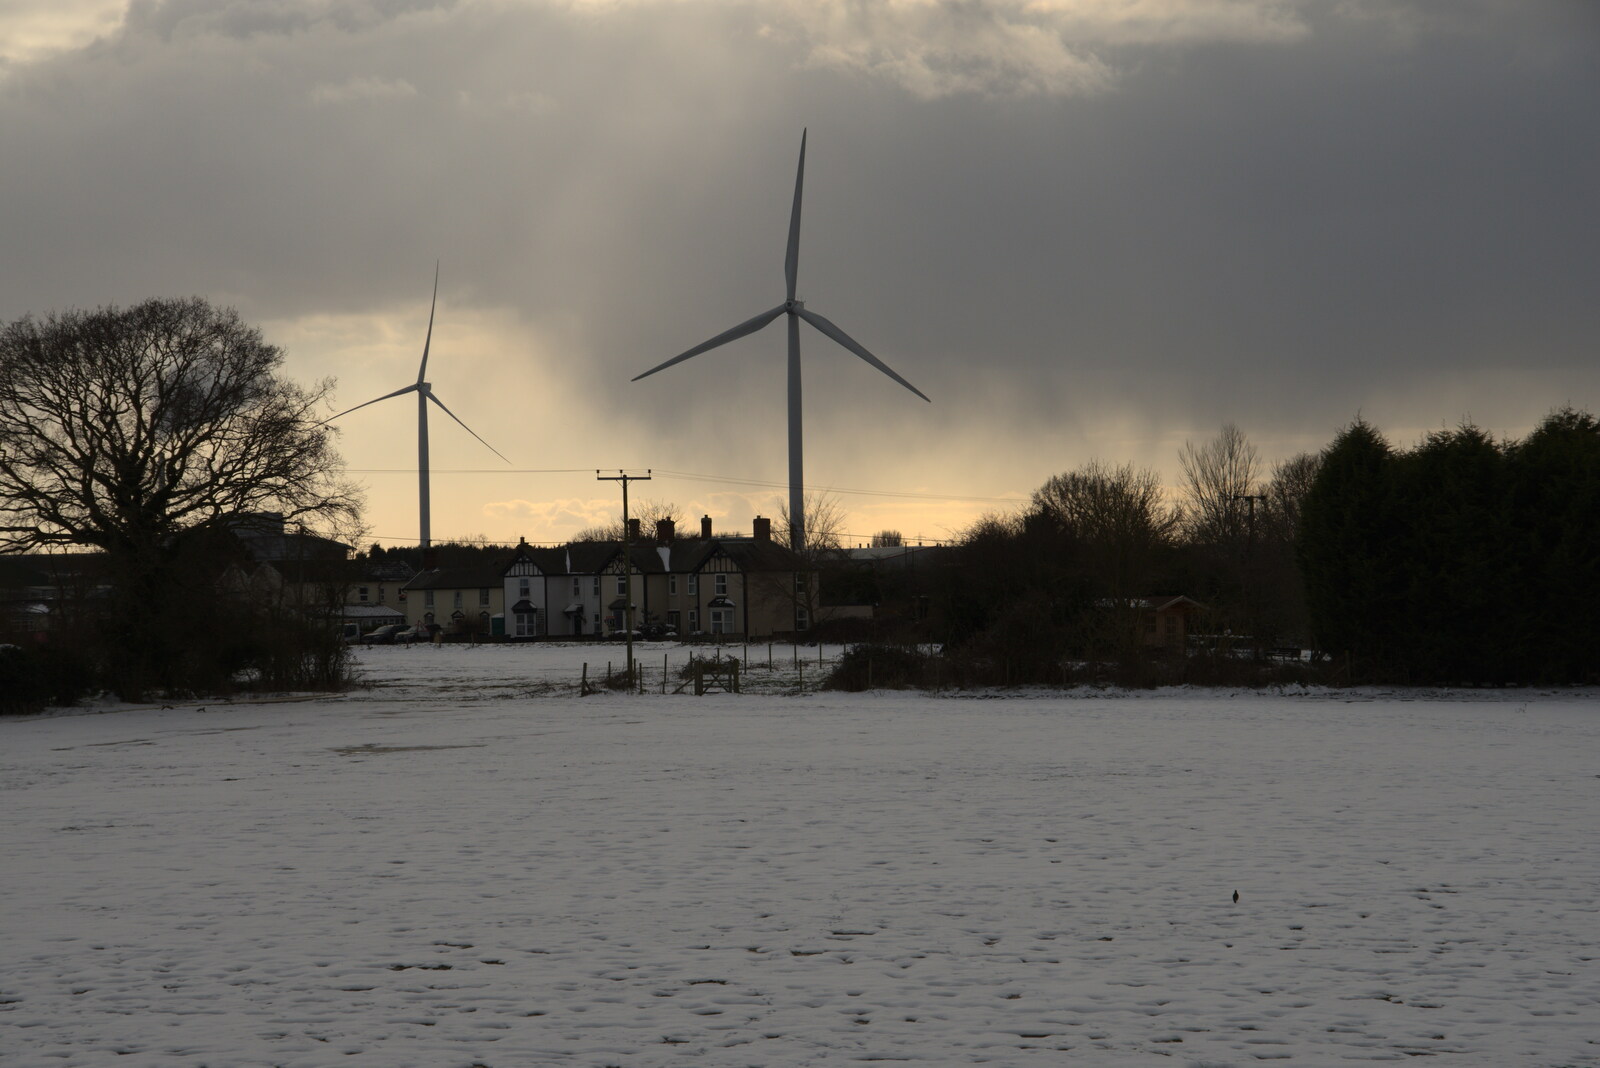 Snow looms behind the wind turbines from Derelict Infants School and Ice Sculptures, Diss and Palgrave, Norfolk and Suffolk - 13th February 2021